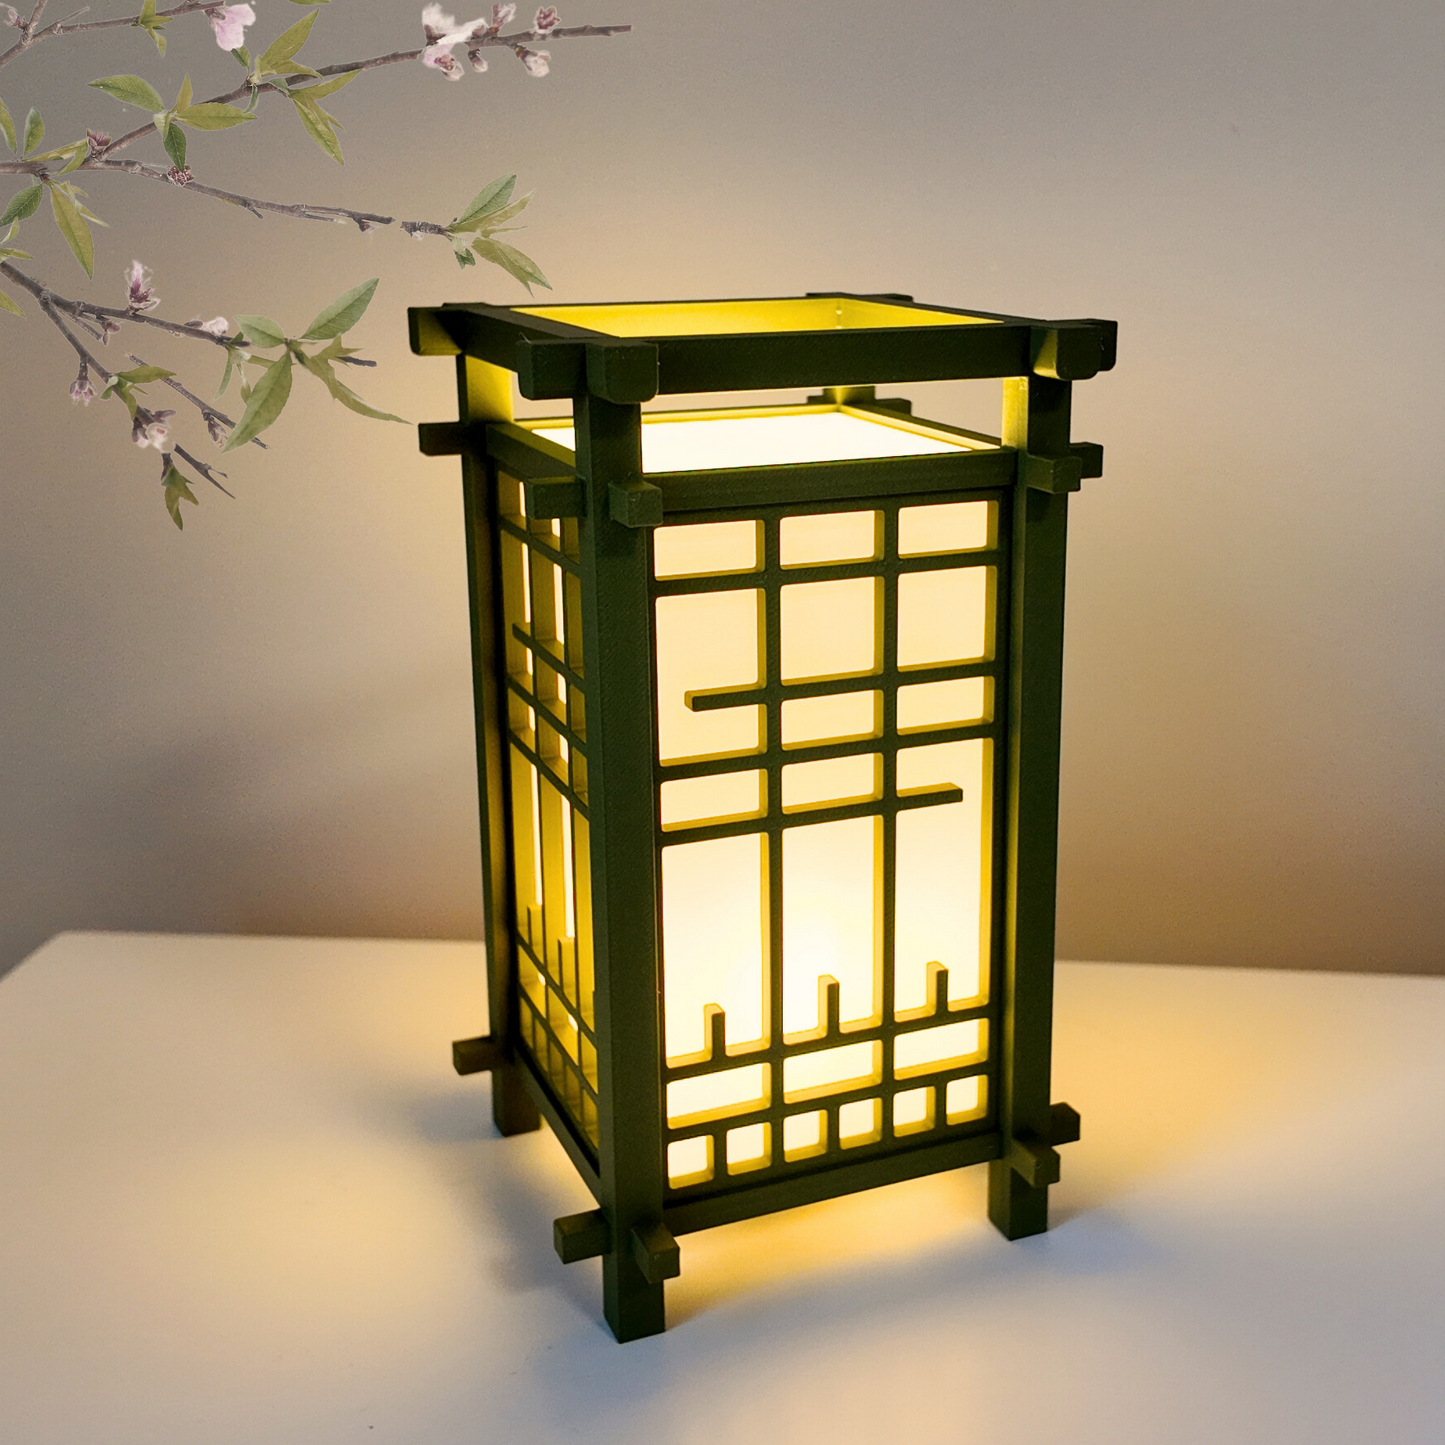 Japanese Shoji Style Lantern - Exquisite Japanese Decor for Home and Room | Unique Desk Lamp and Table Lamp Design | Mini Japanese Lantern Transforms Any Space